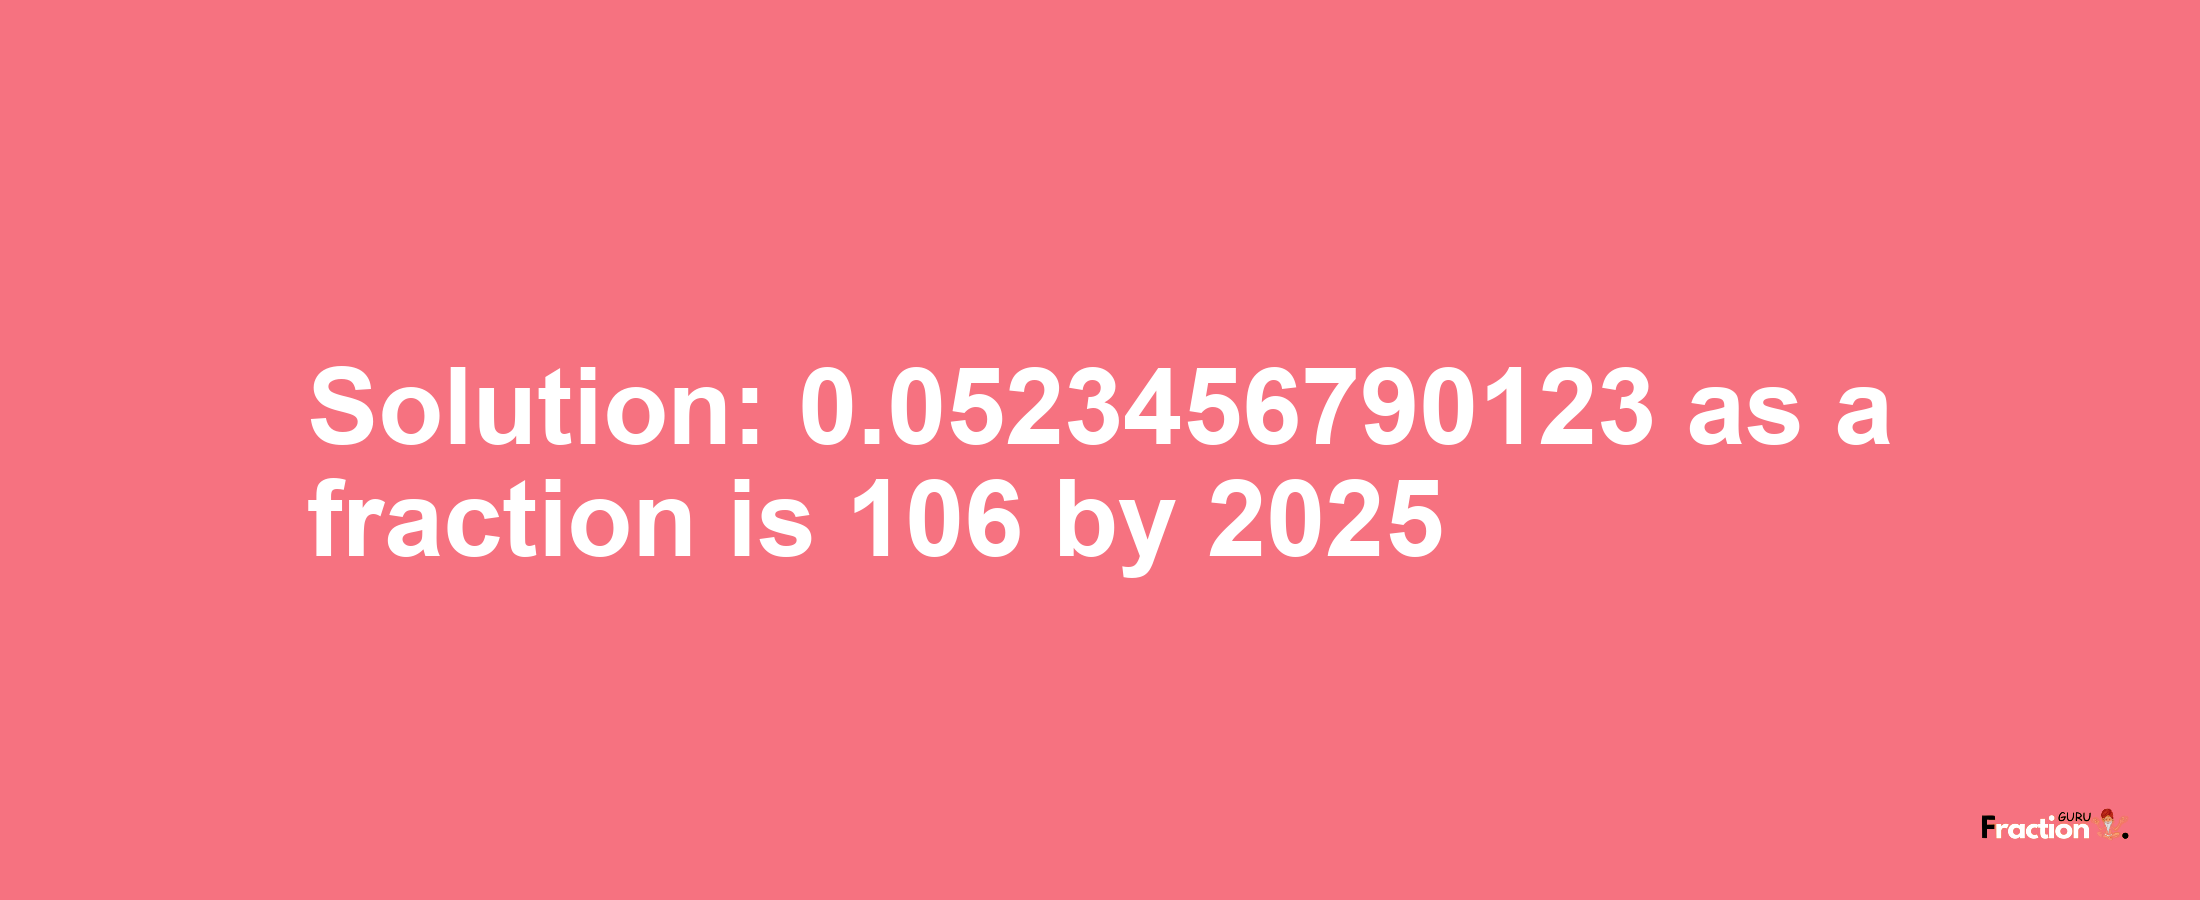 Solution:0.0523456790123 as a fraction is 106/2025